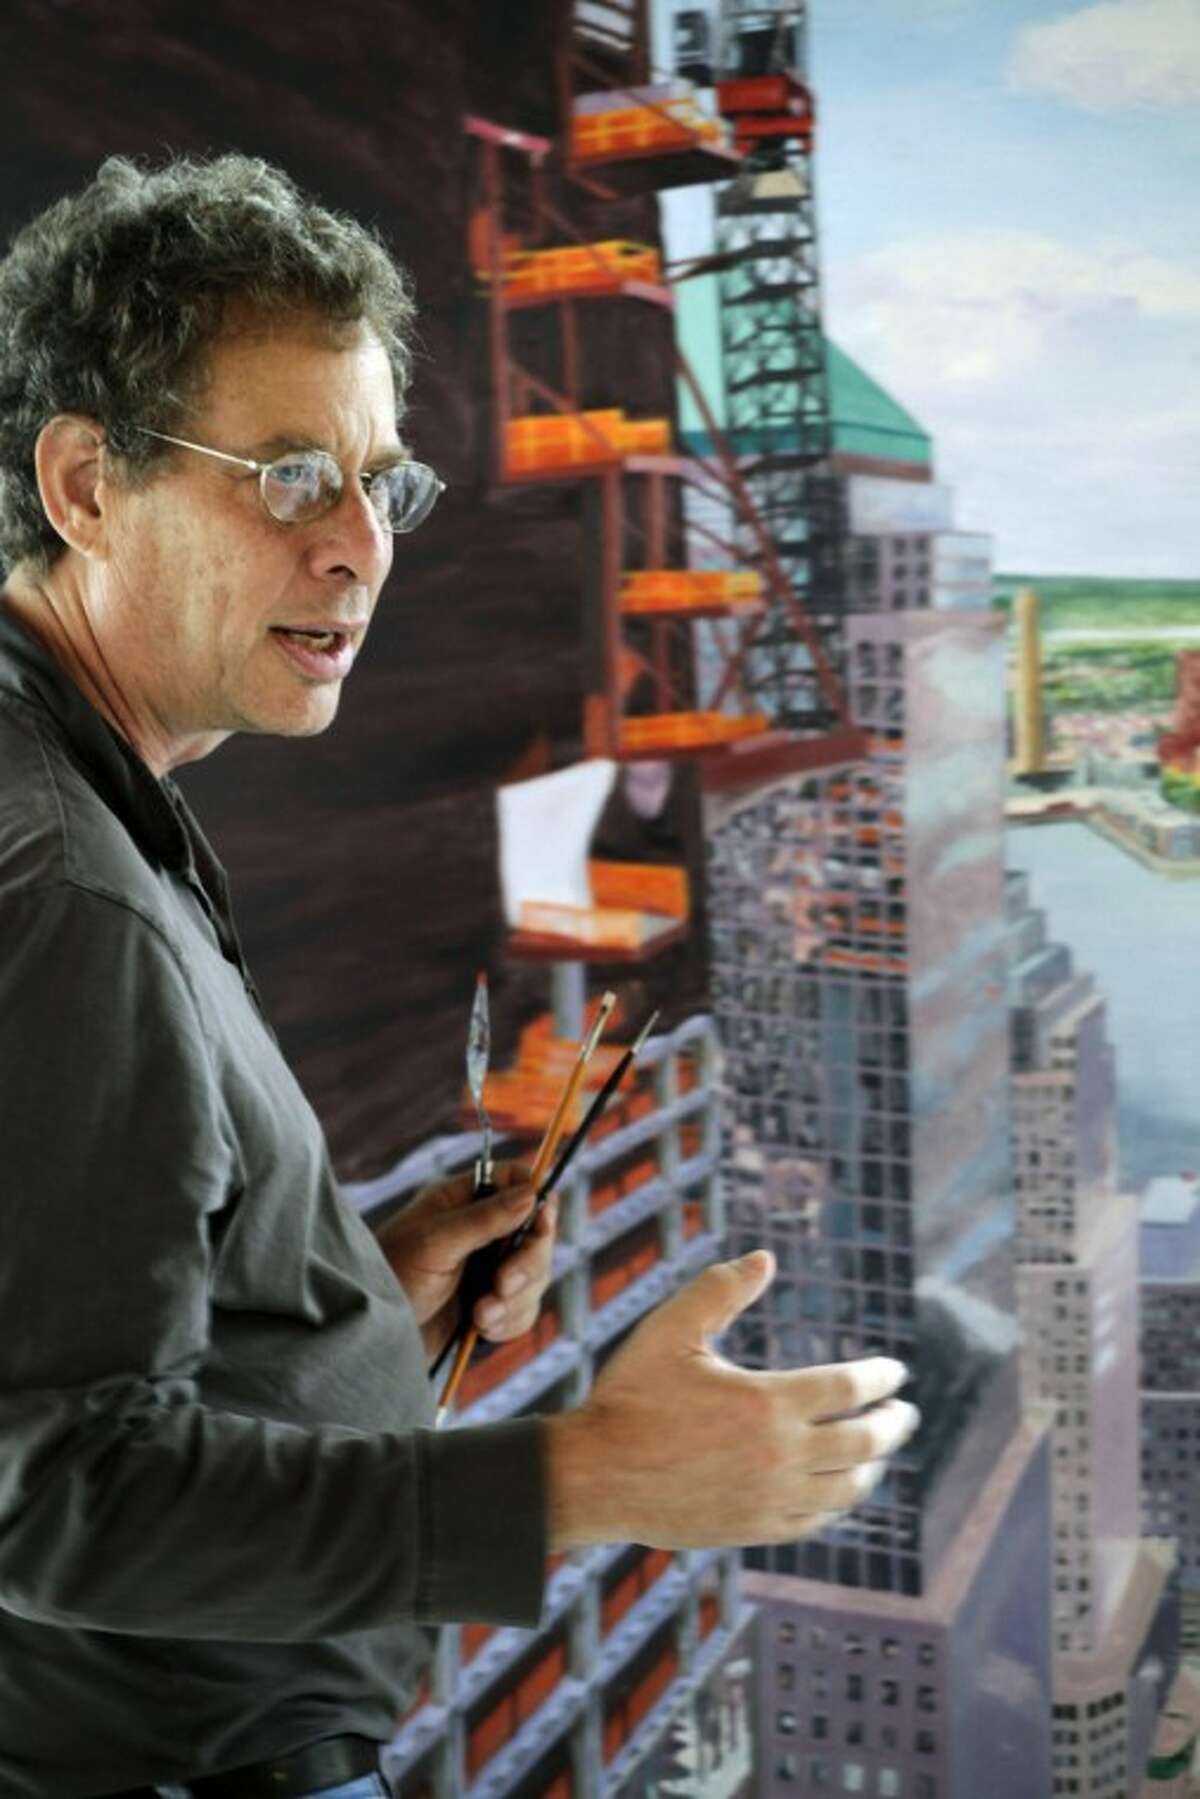 In this Aug. 25, 2011 photo, artist Todd Stone stands next to a painting of the World Trade Center in his studio, in New York. Stone is among the artists who are showing their works in exhibitions commemorating the 10th anniversary of the terrorist attacks. At least two dozen Sept. 11-related museum and gallery exhibitions are being presented throughout the city. (AP Photo/Mark Lennihan)